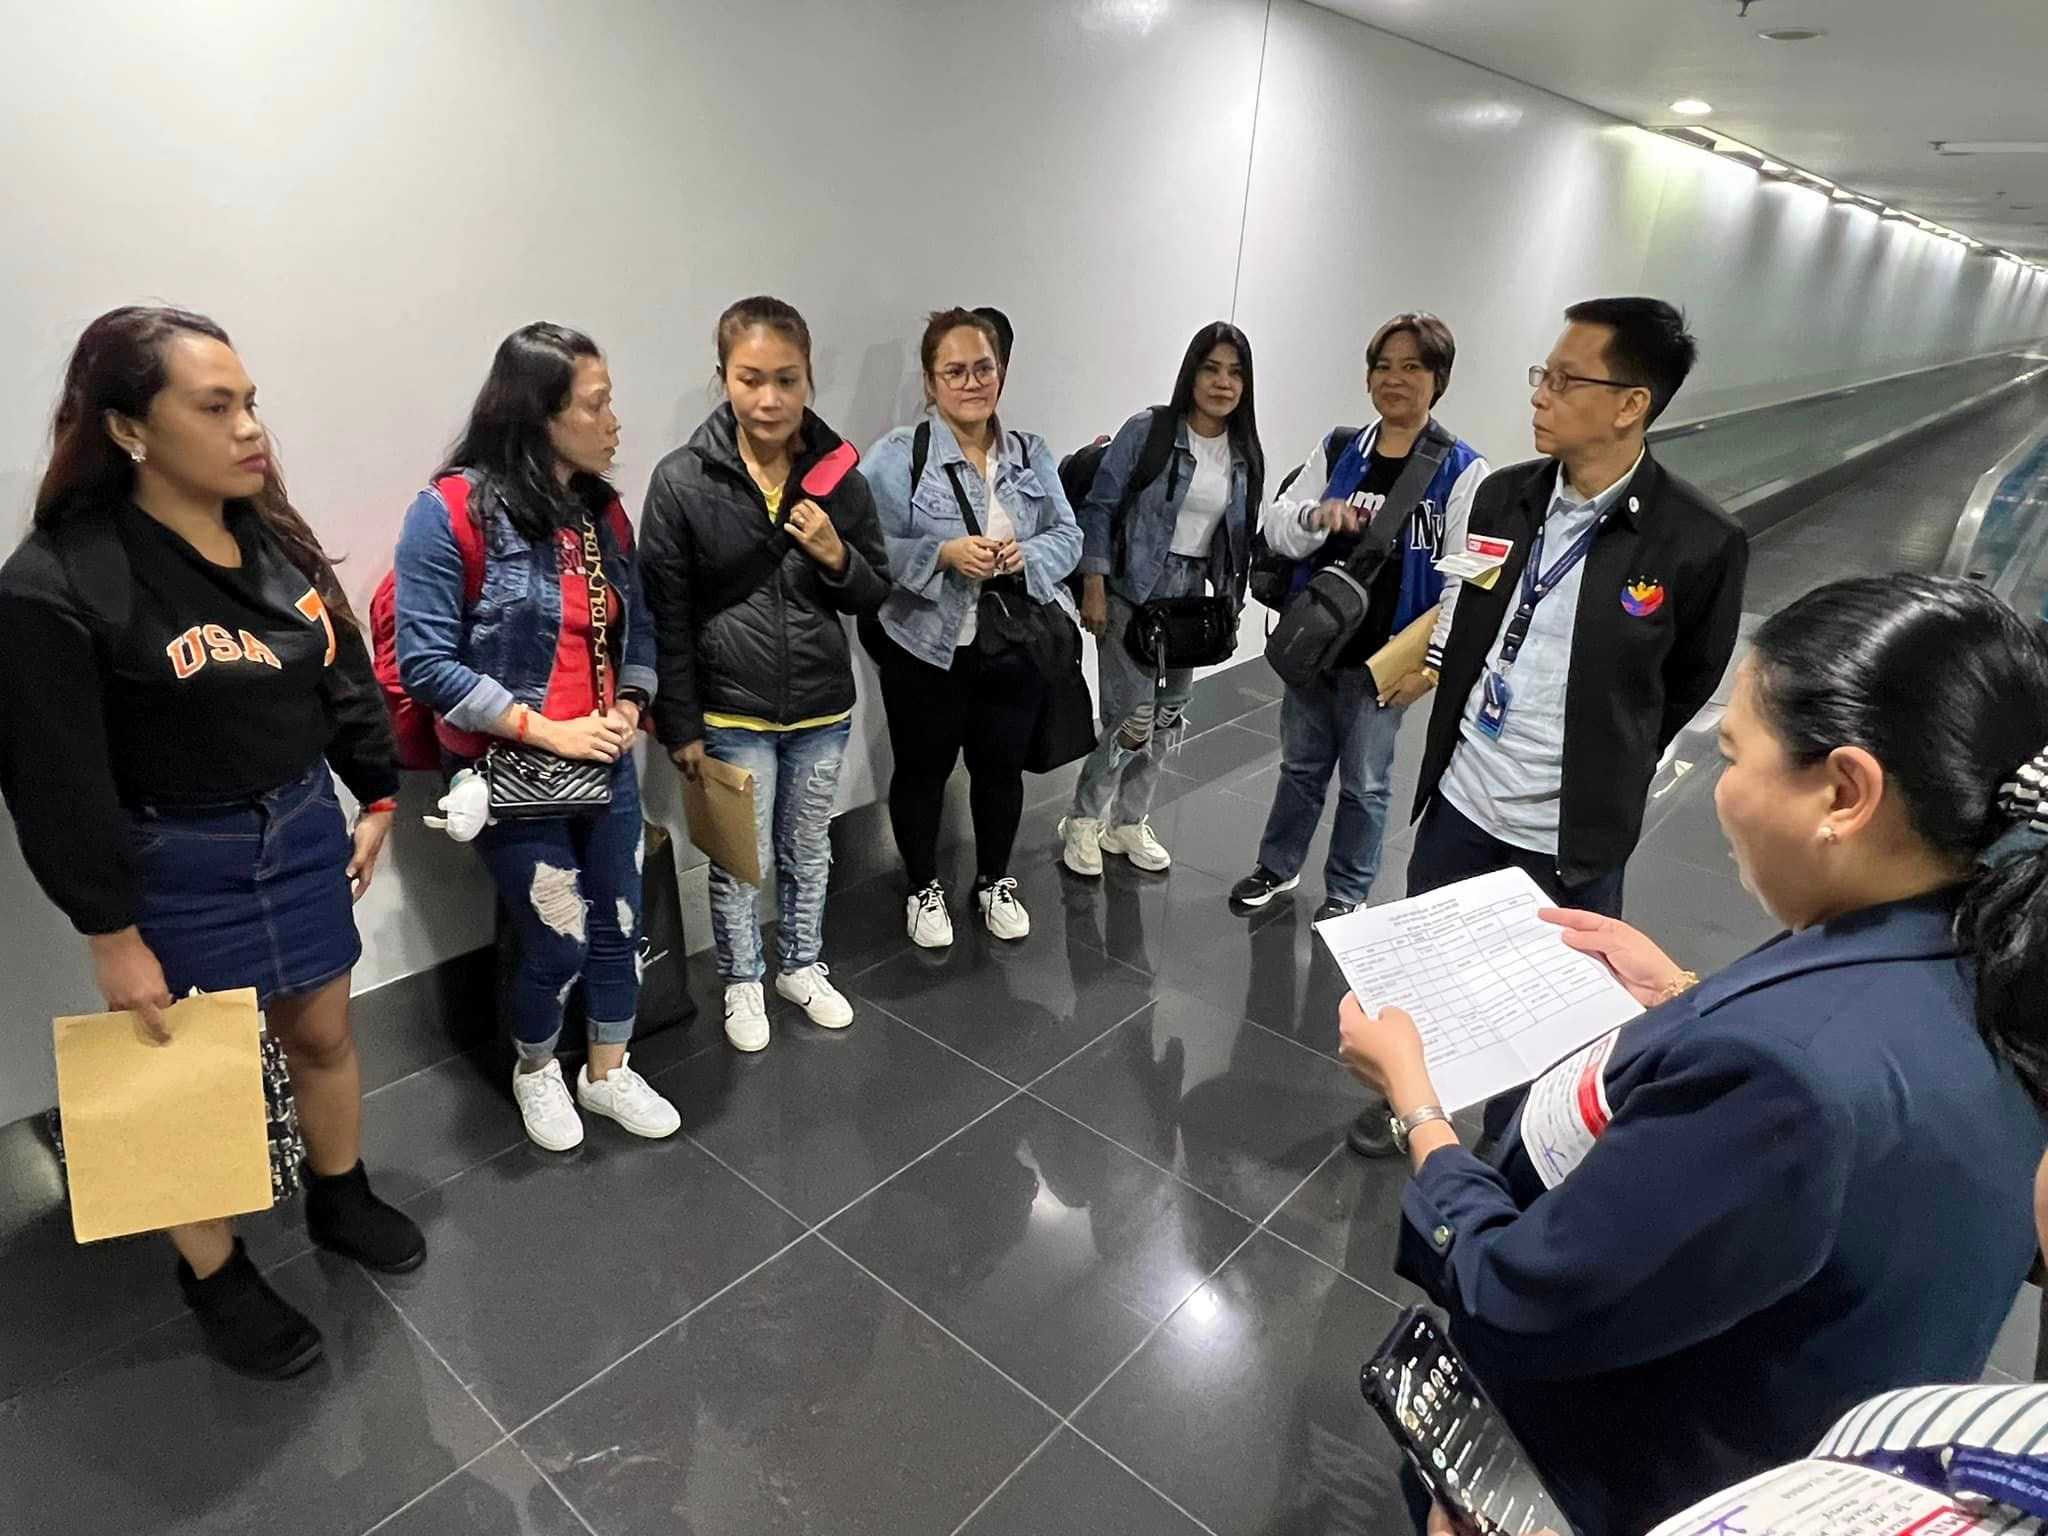 9 OFWs from Lebanon safely arrived in PH - DMW